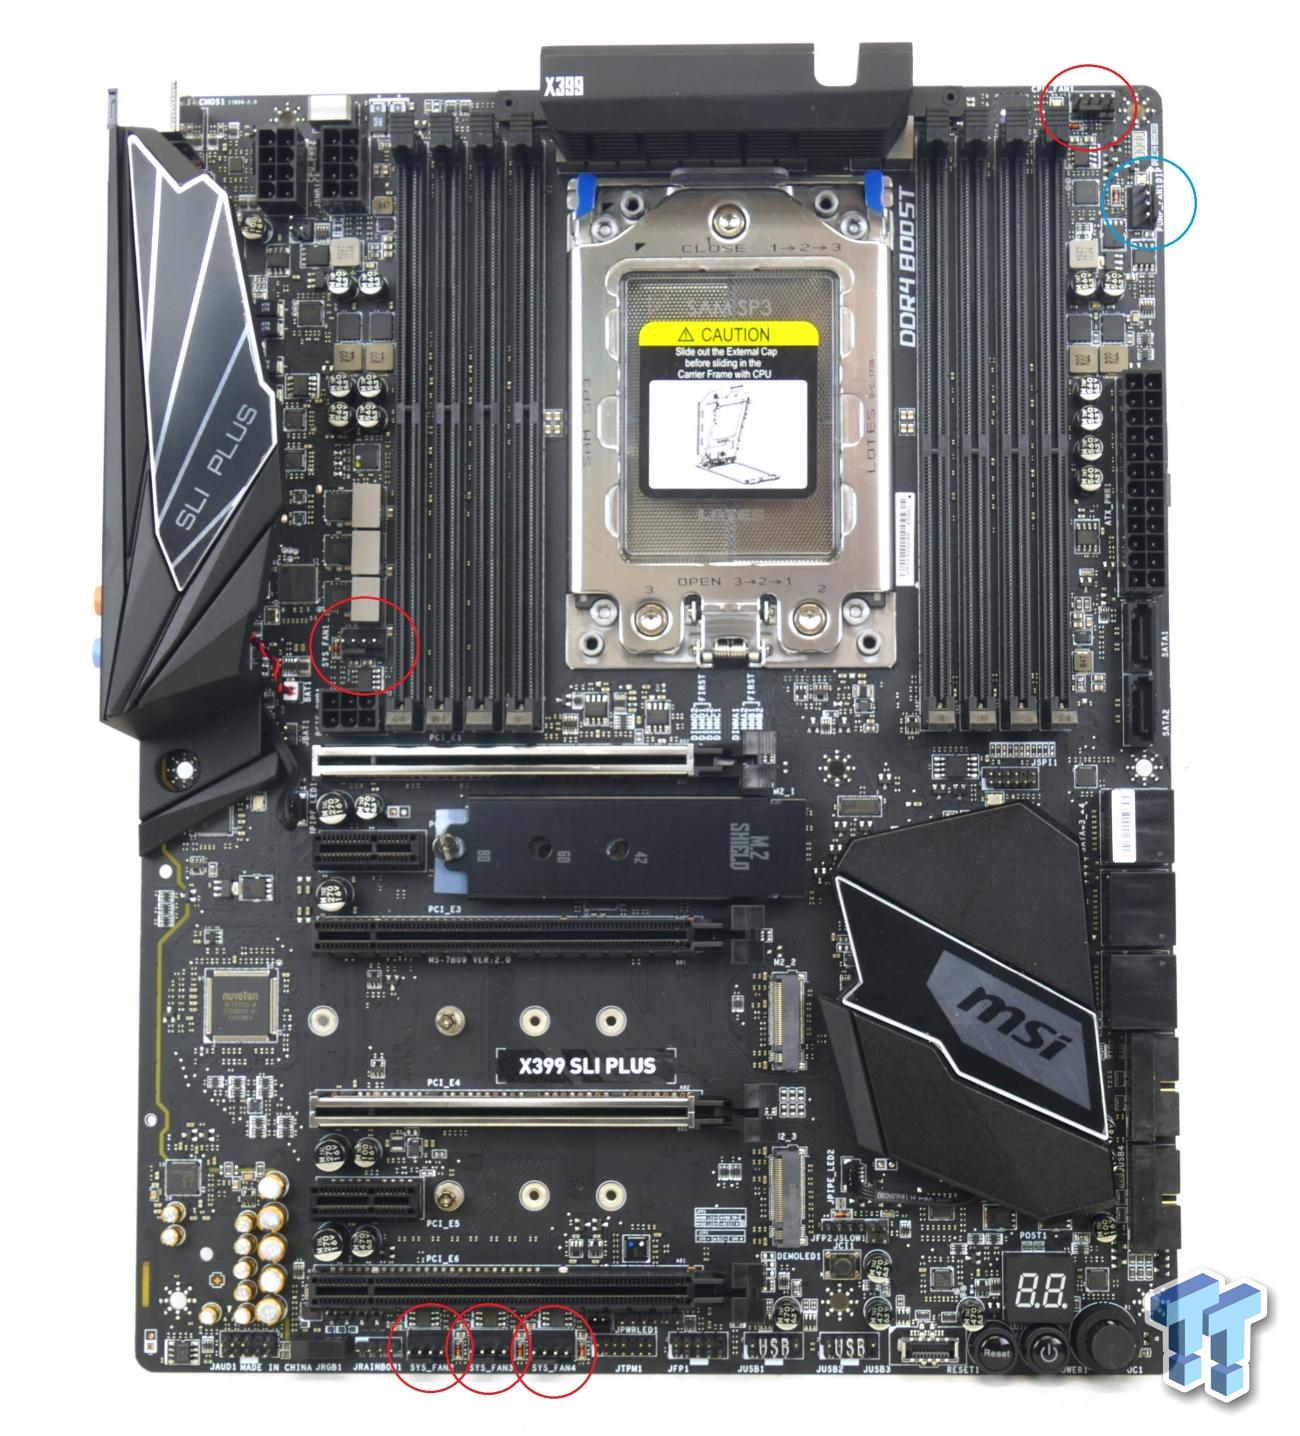 MSI X399 GAMING PRO CARBON AC (AMD X399) Motherboard Review